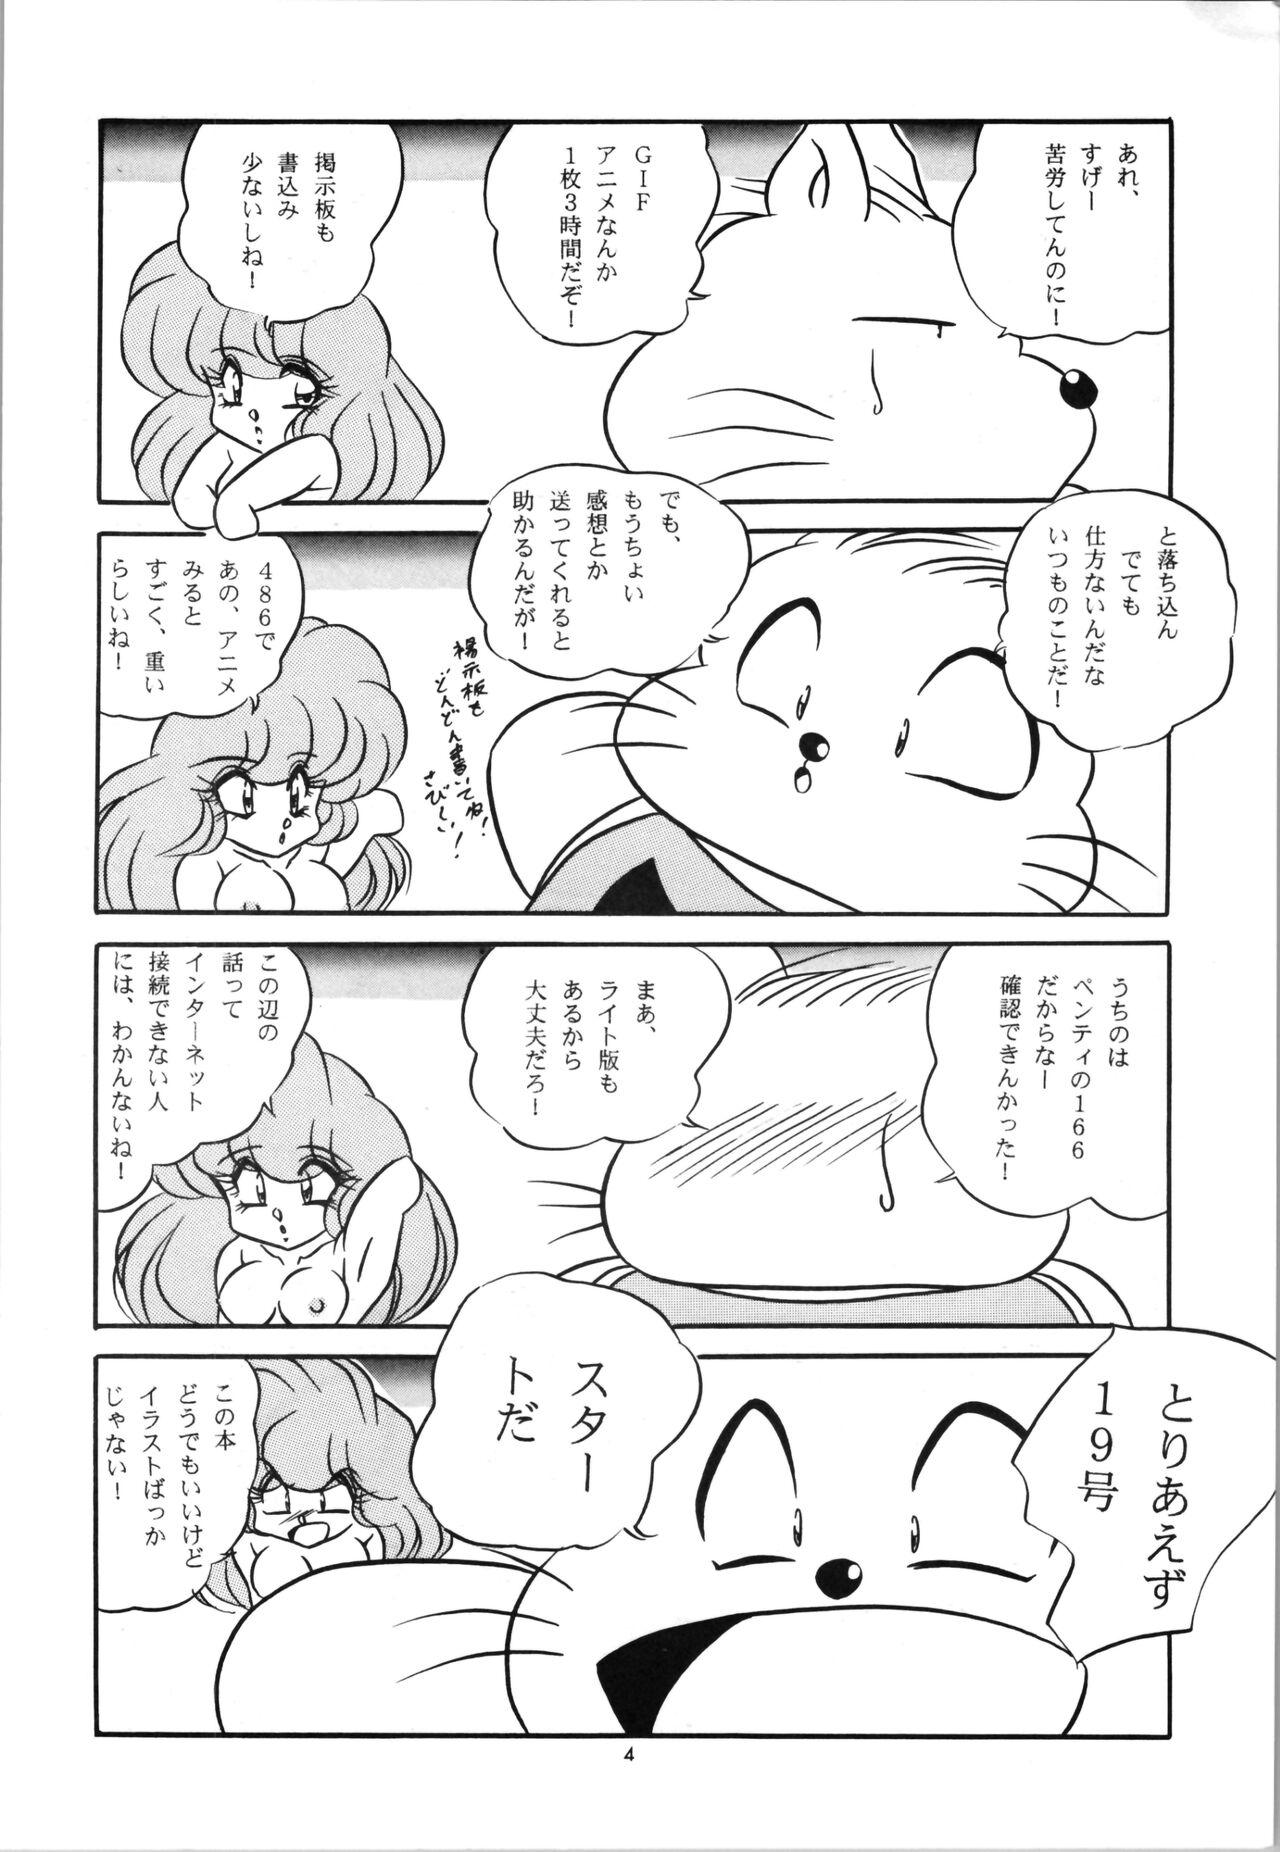 Blackcocks C-COMPANY SPECIAL STAGE 19 - Ranma 12 Amateurs Gone Wild - Page 6